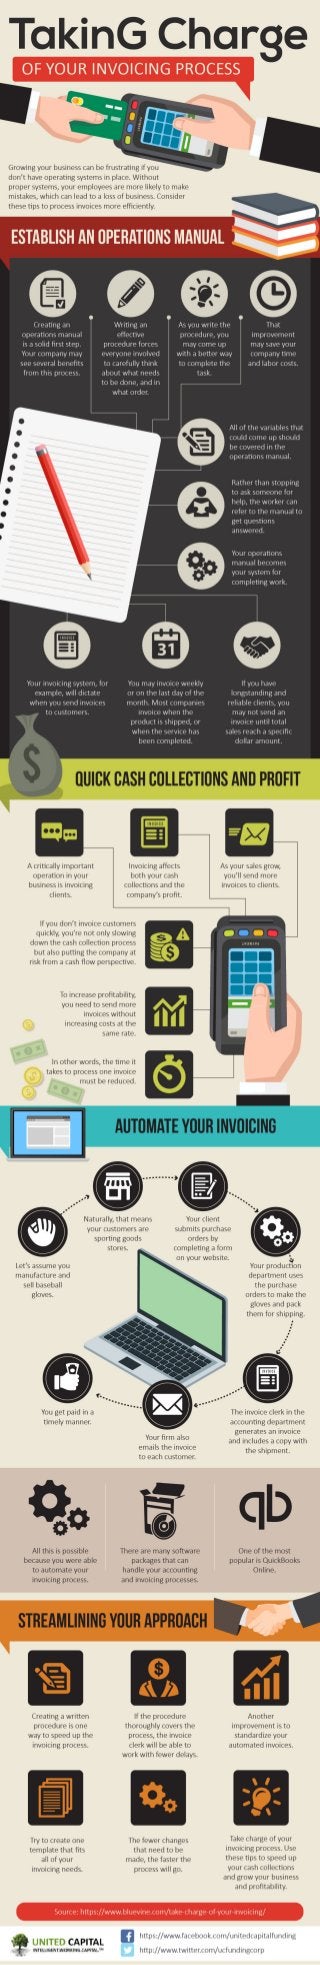 Taking Charge of Your Invoicing Process